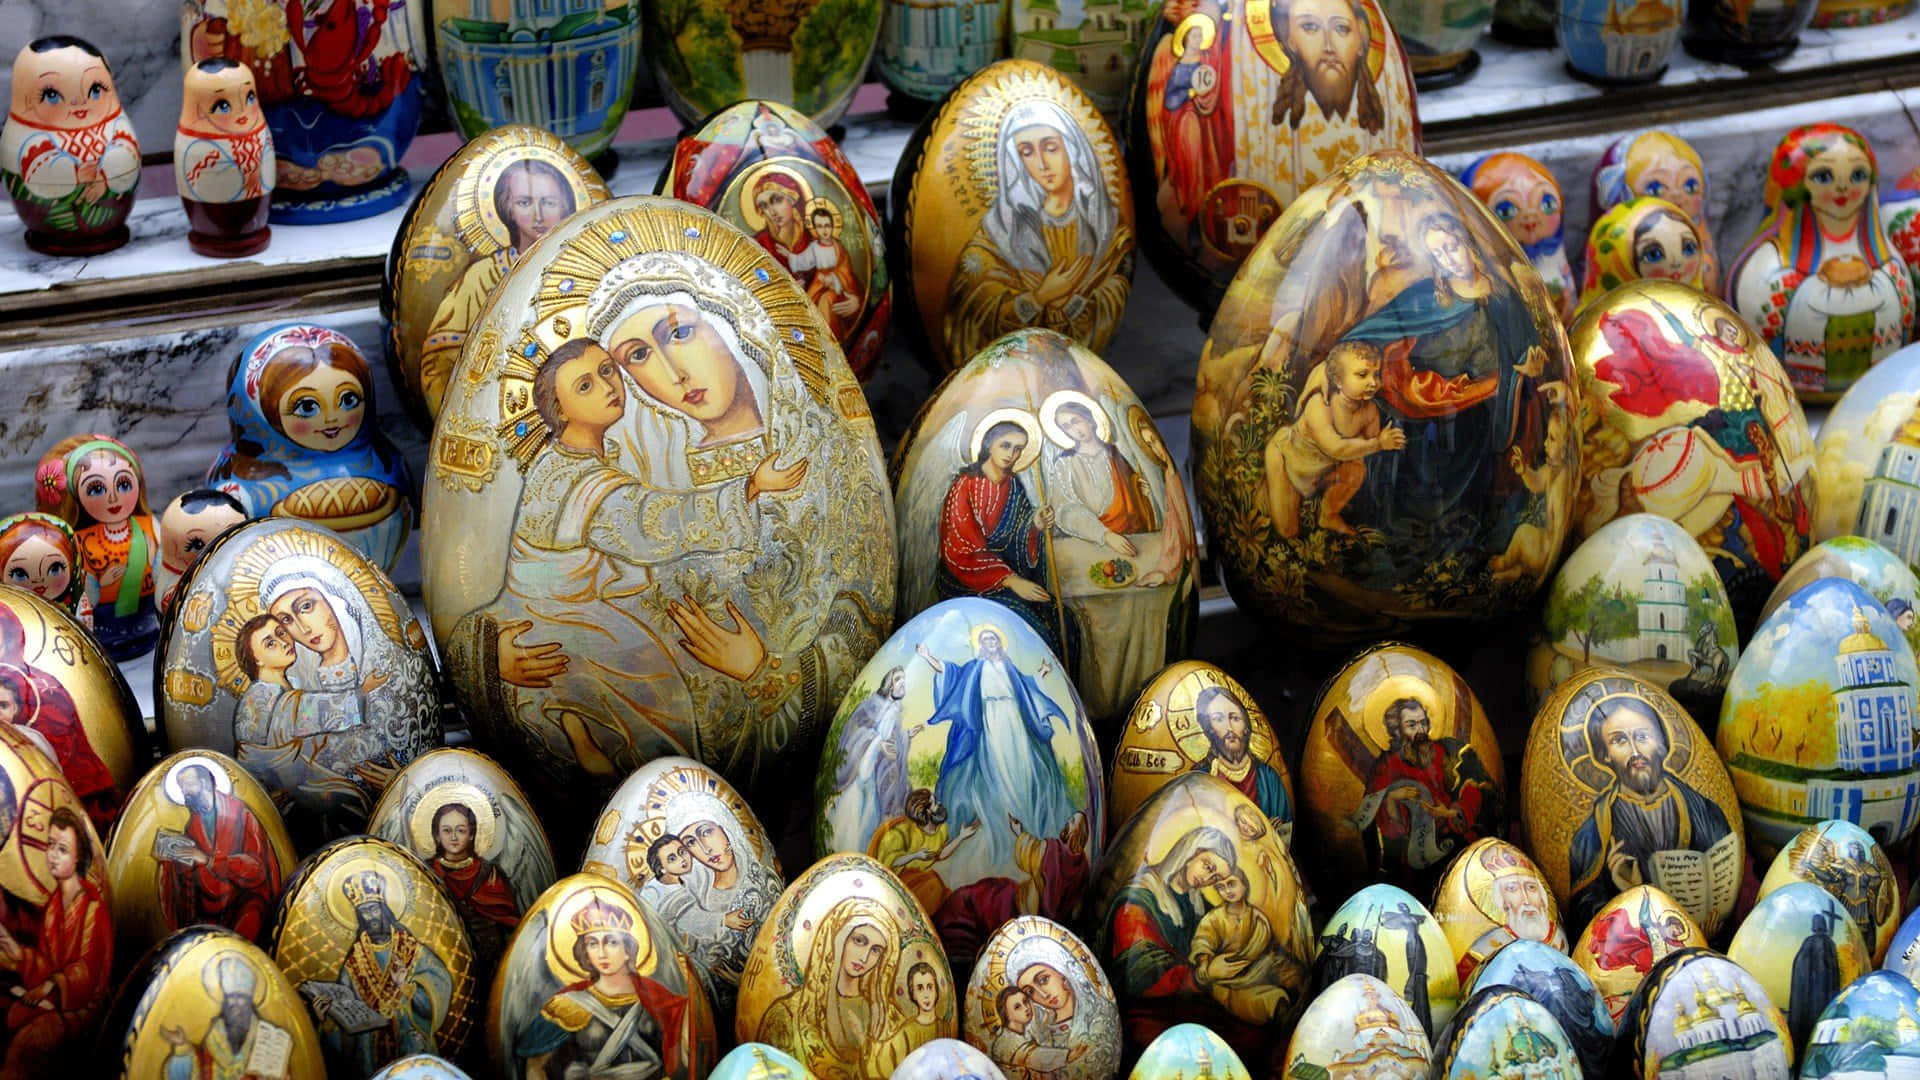 A Display Of Painted Eggs With Religious Images Wallpaper